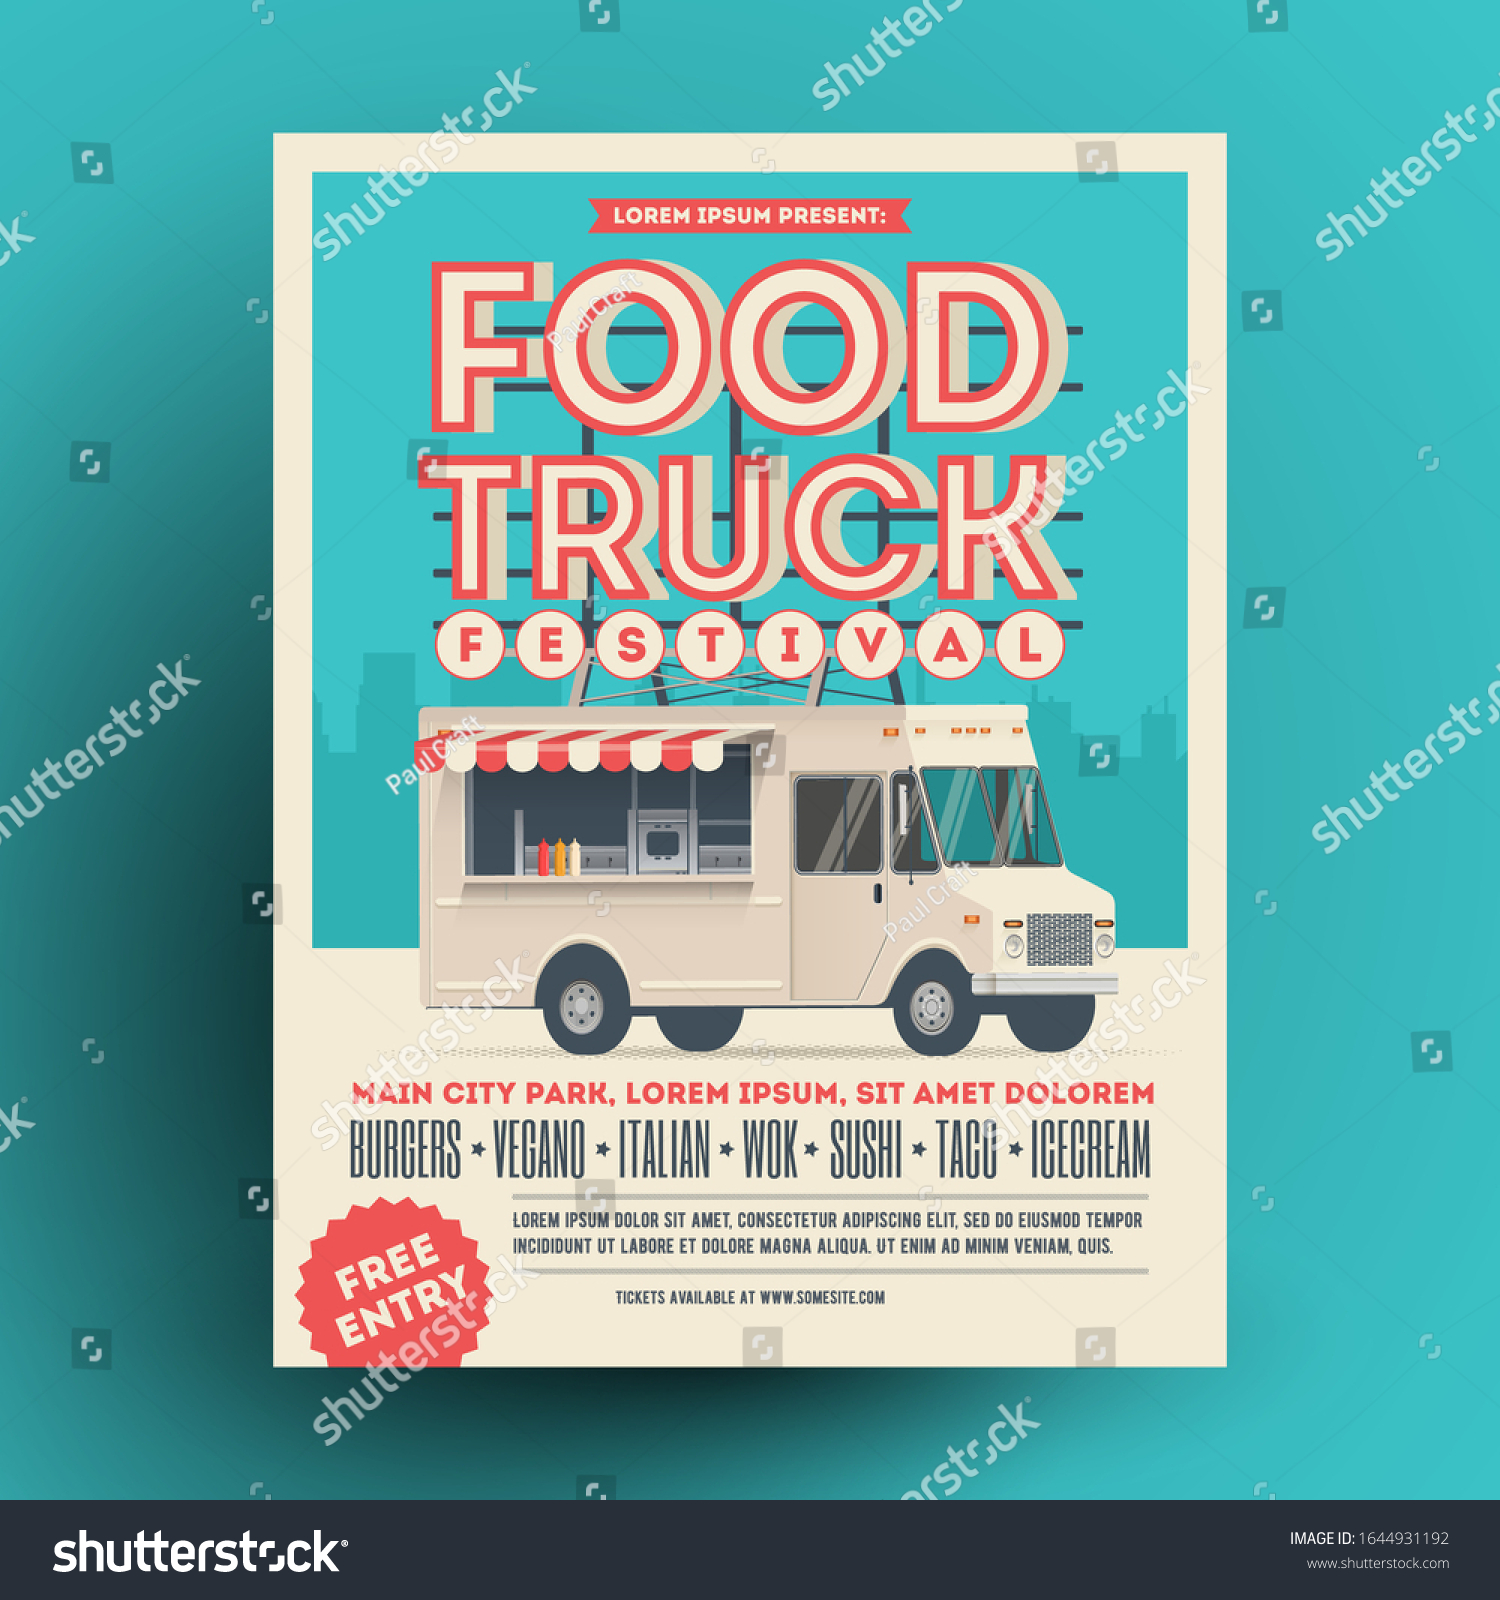 food-truck-street-food-festival-poster-stock-vector-royalty-free